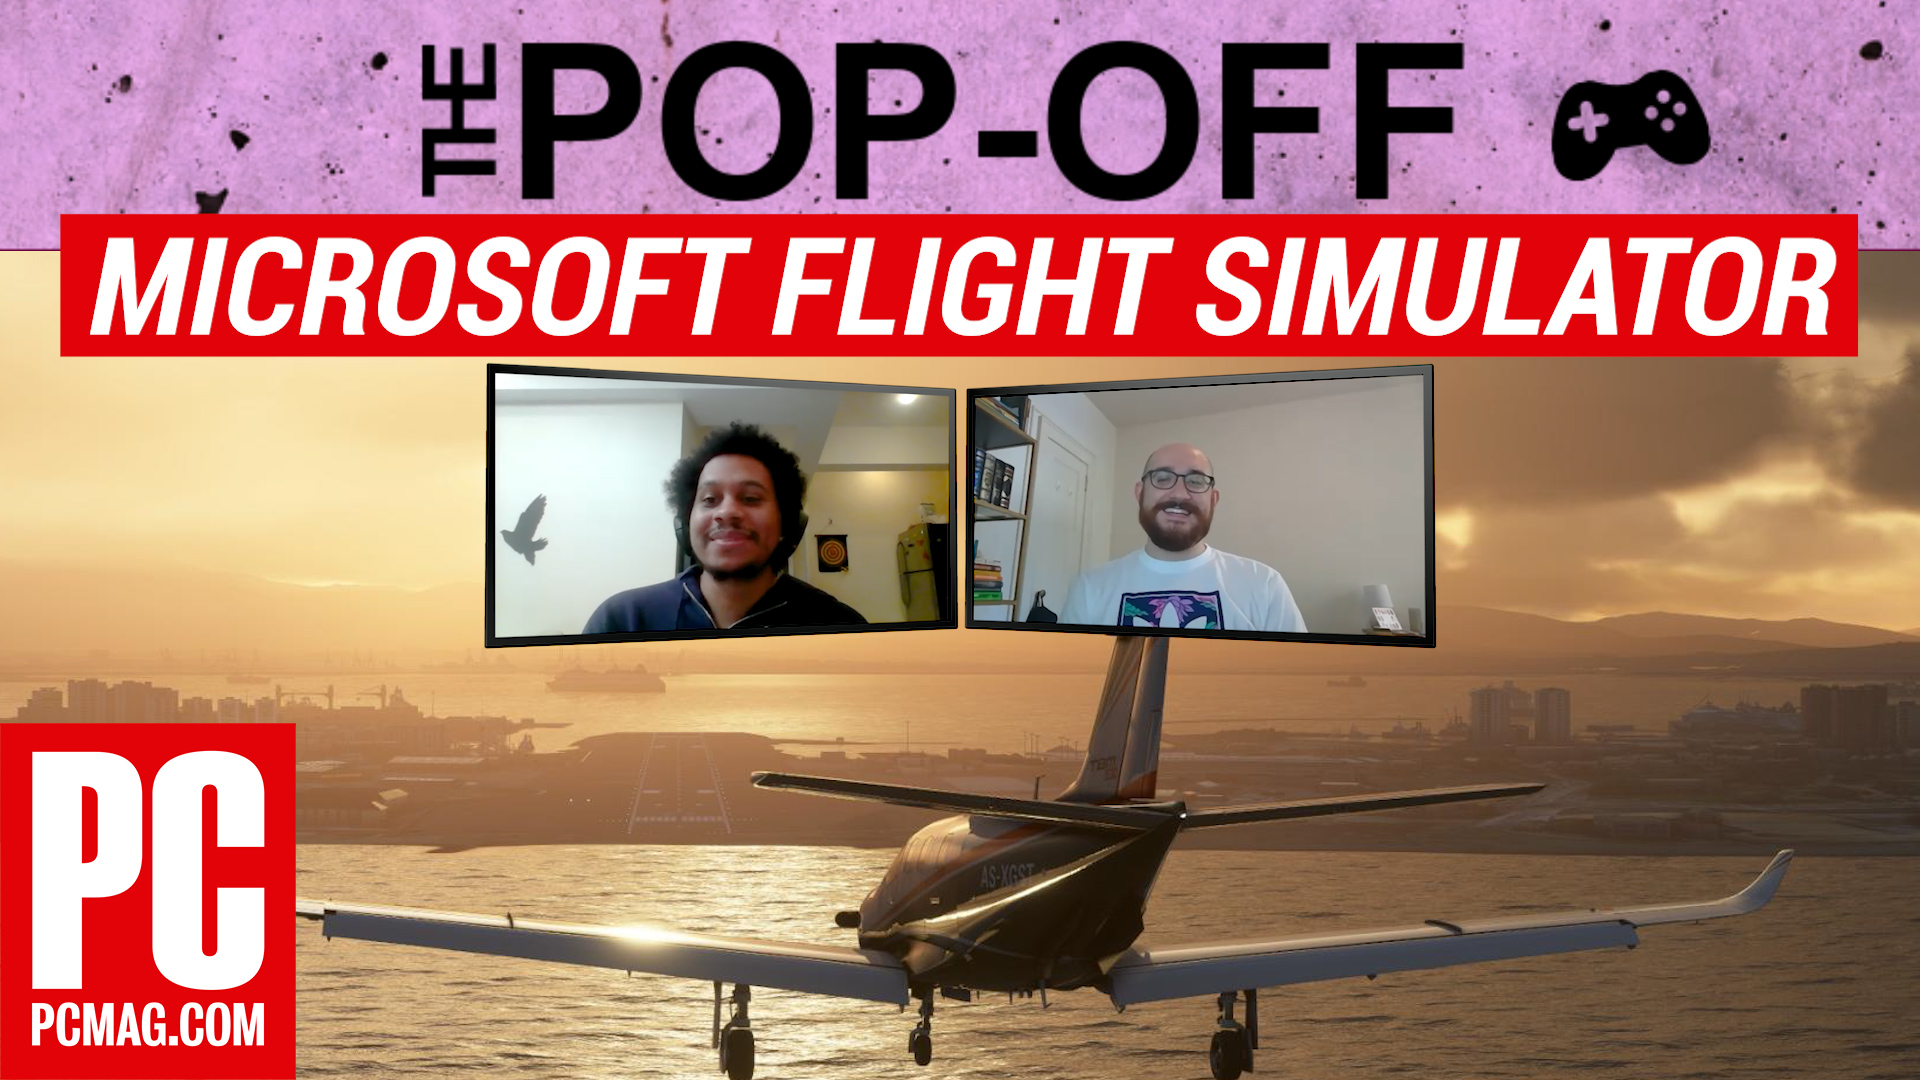 Microsoft Flight Simulator Is a Love Letter to Aviation